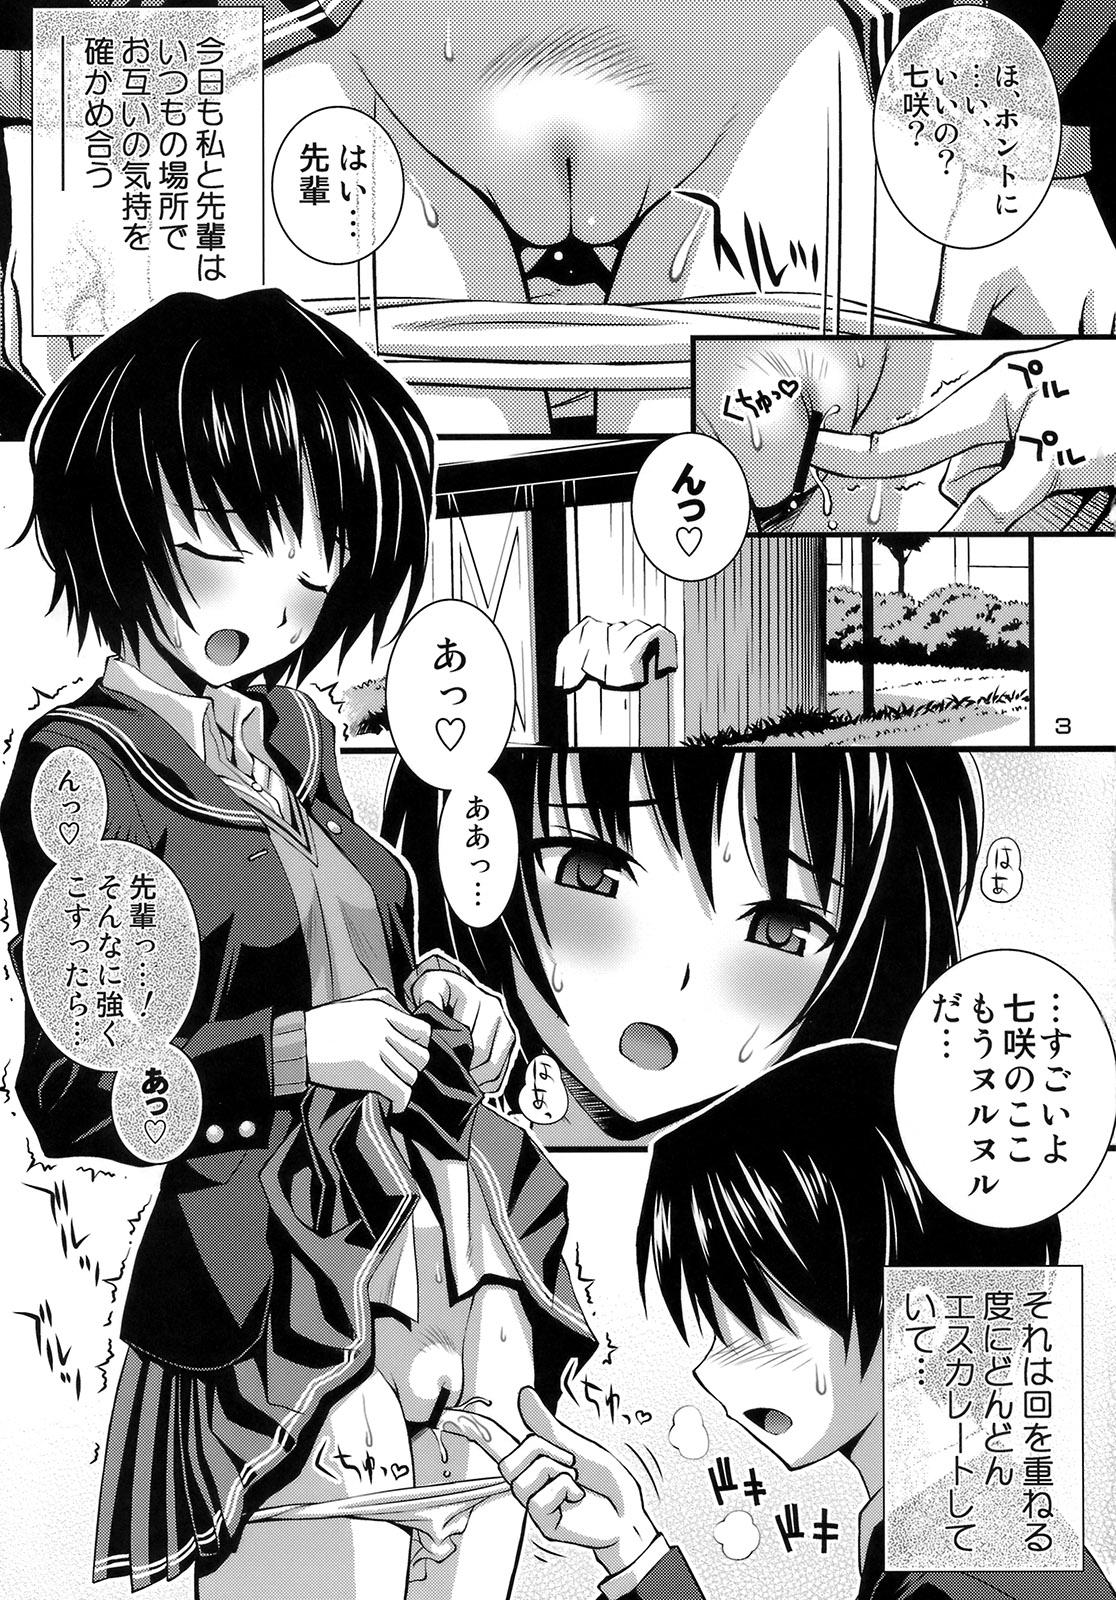 Scene Steel Mayonnaise 11 - Amagami Blond - Page 2